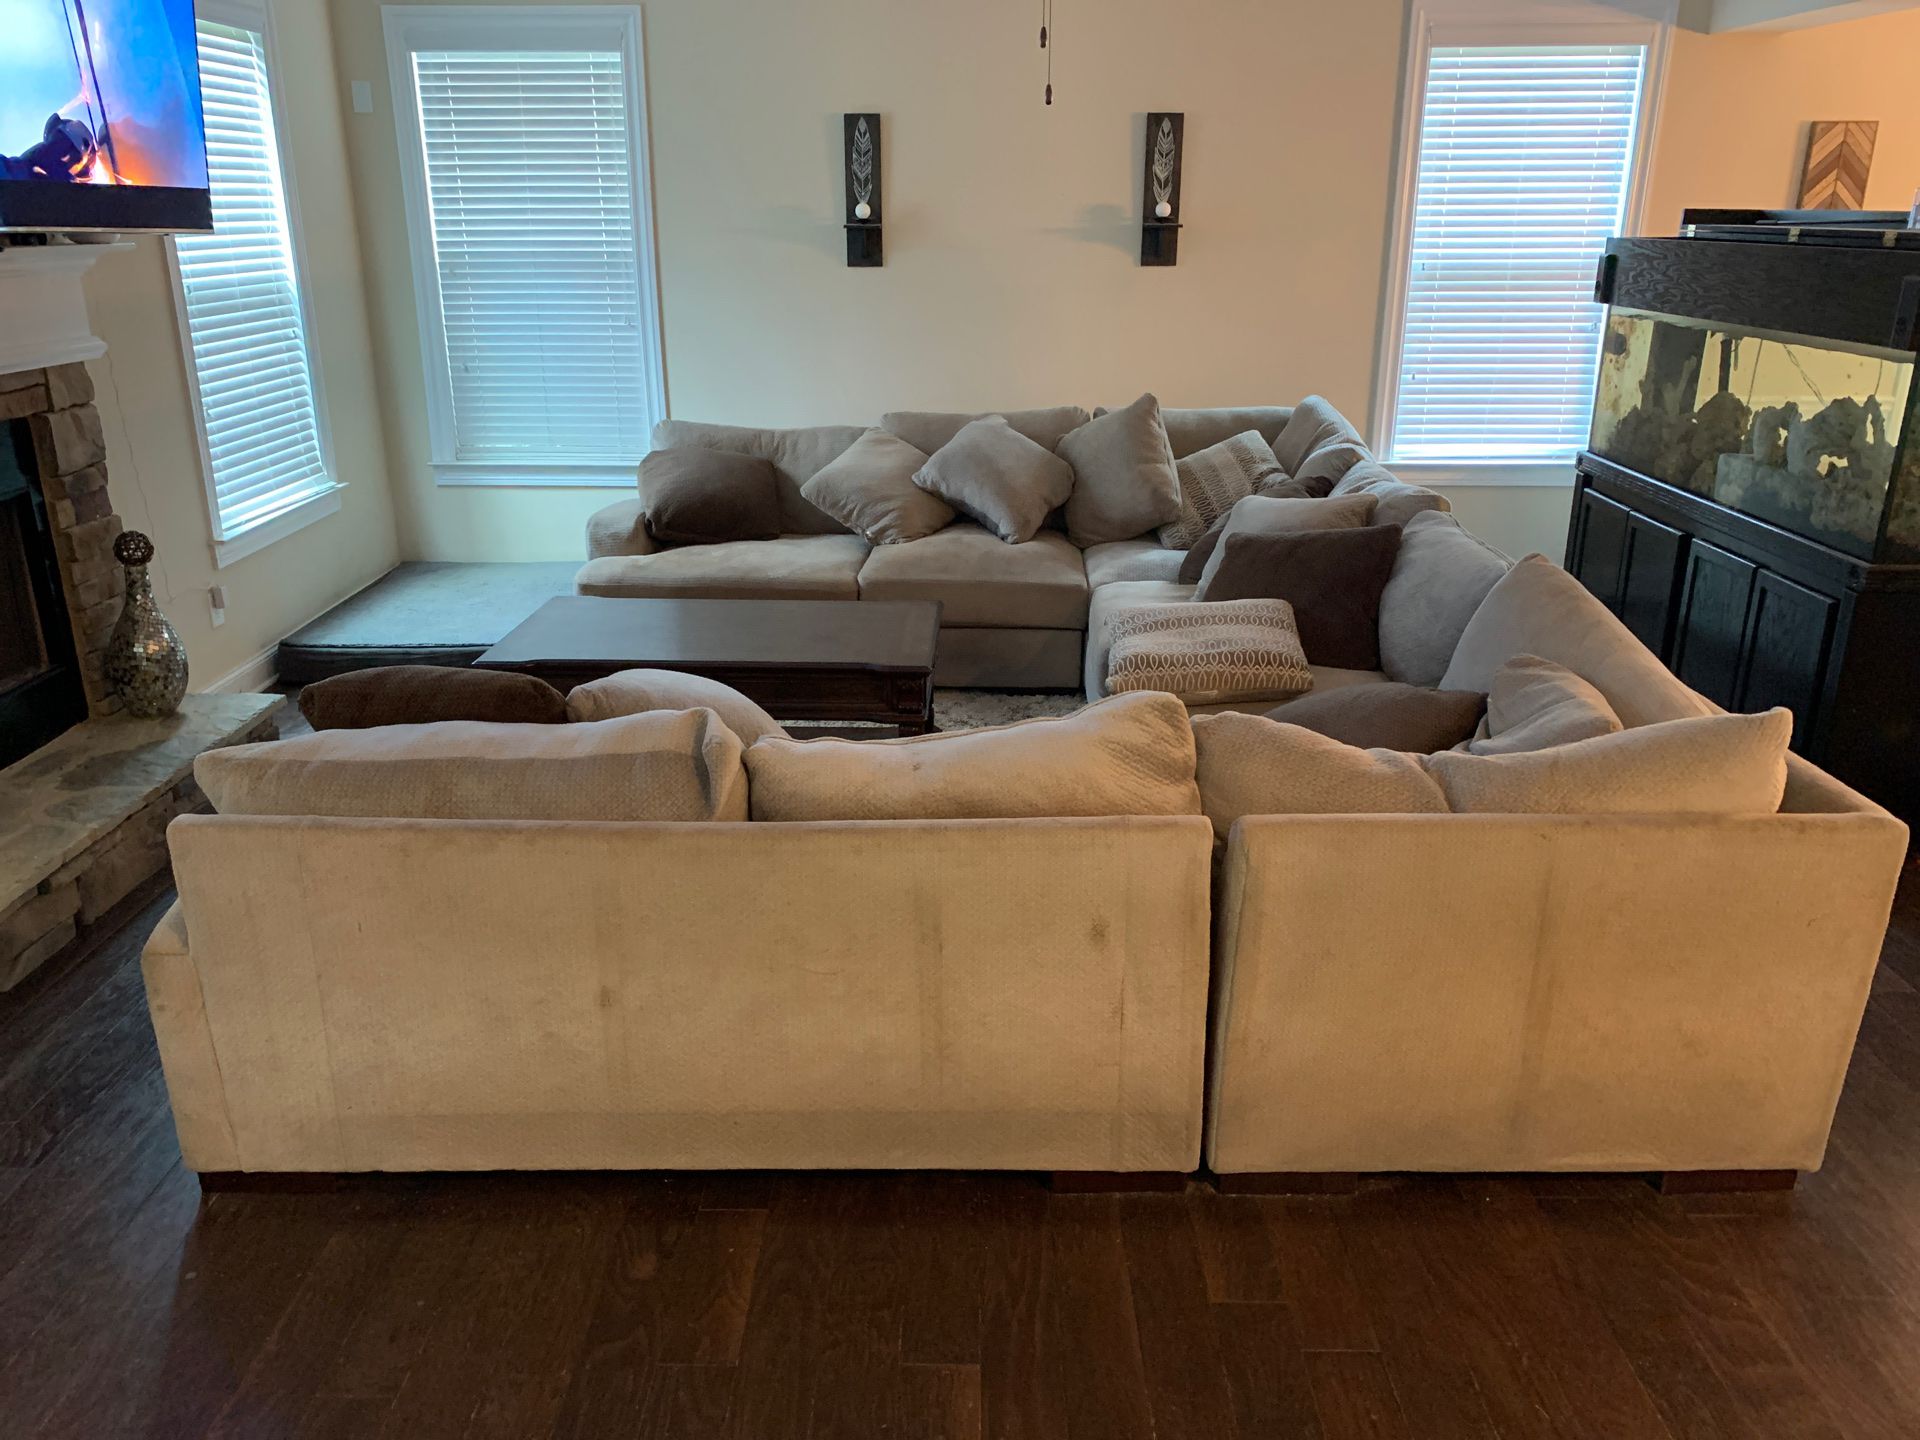 U-shape sectional couch